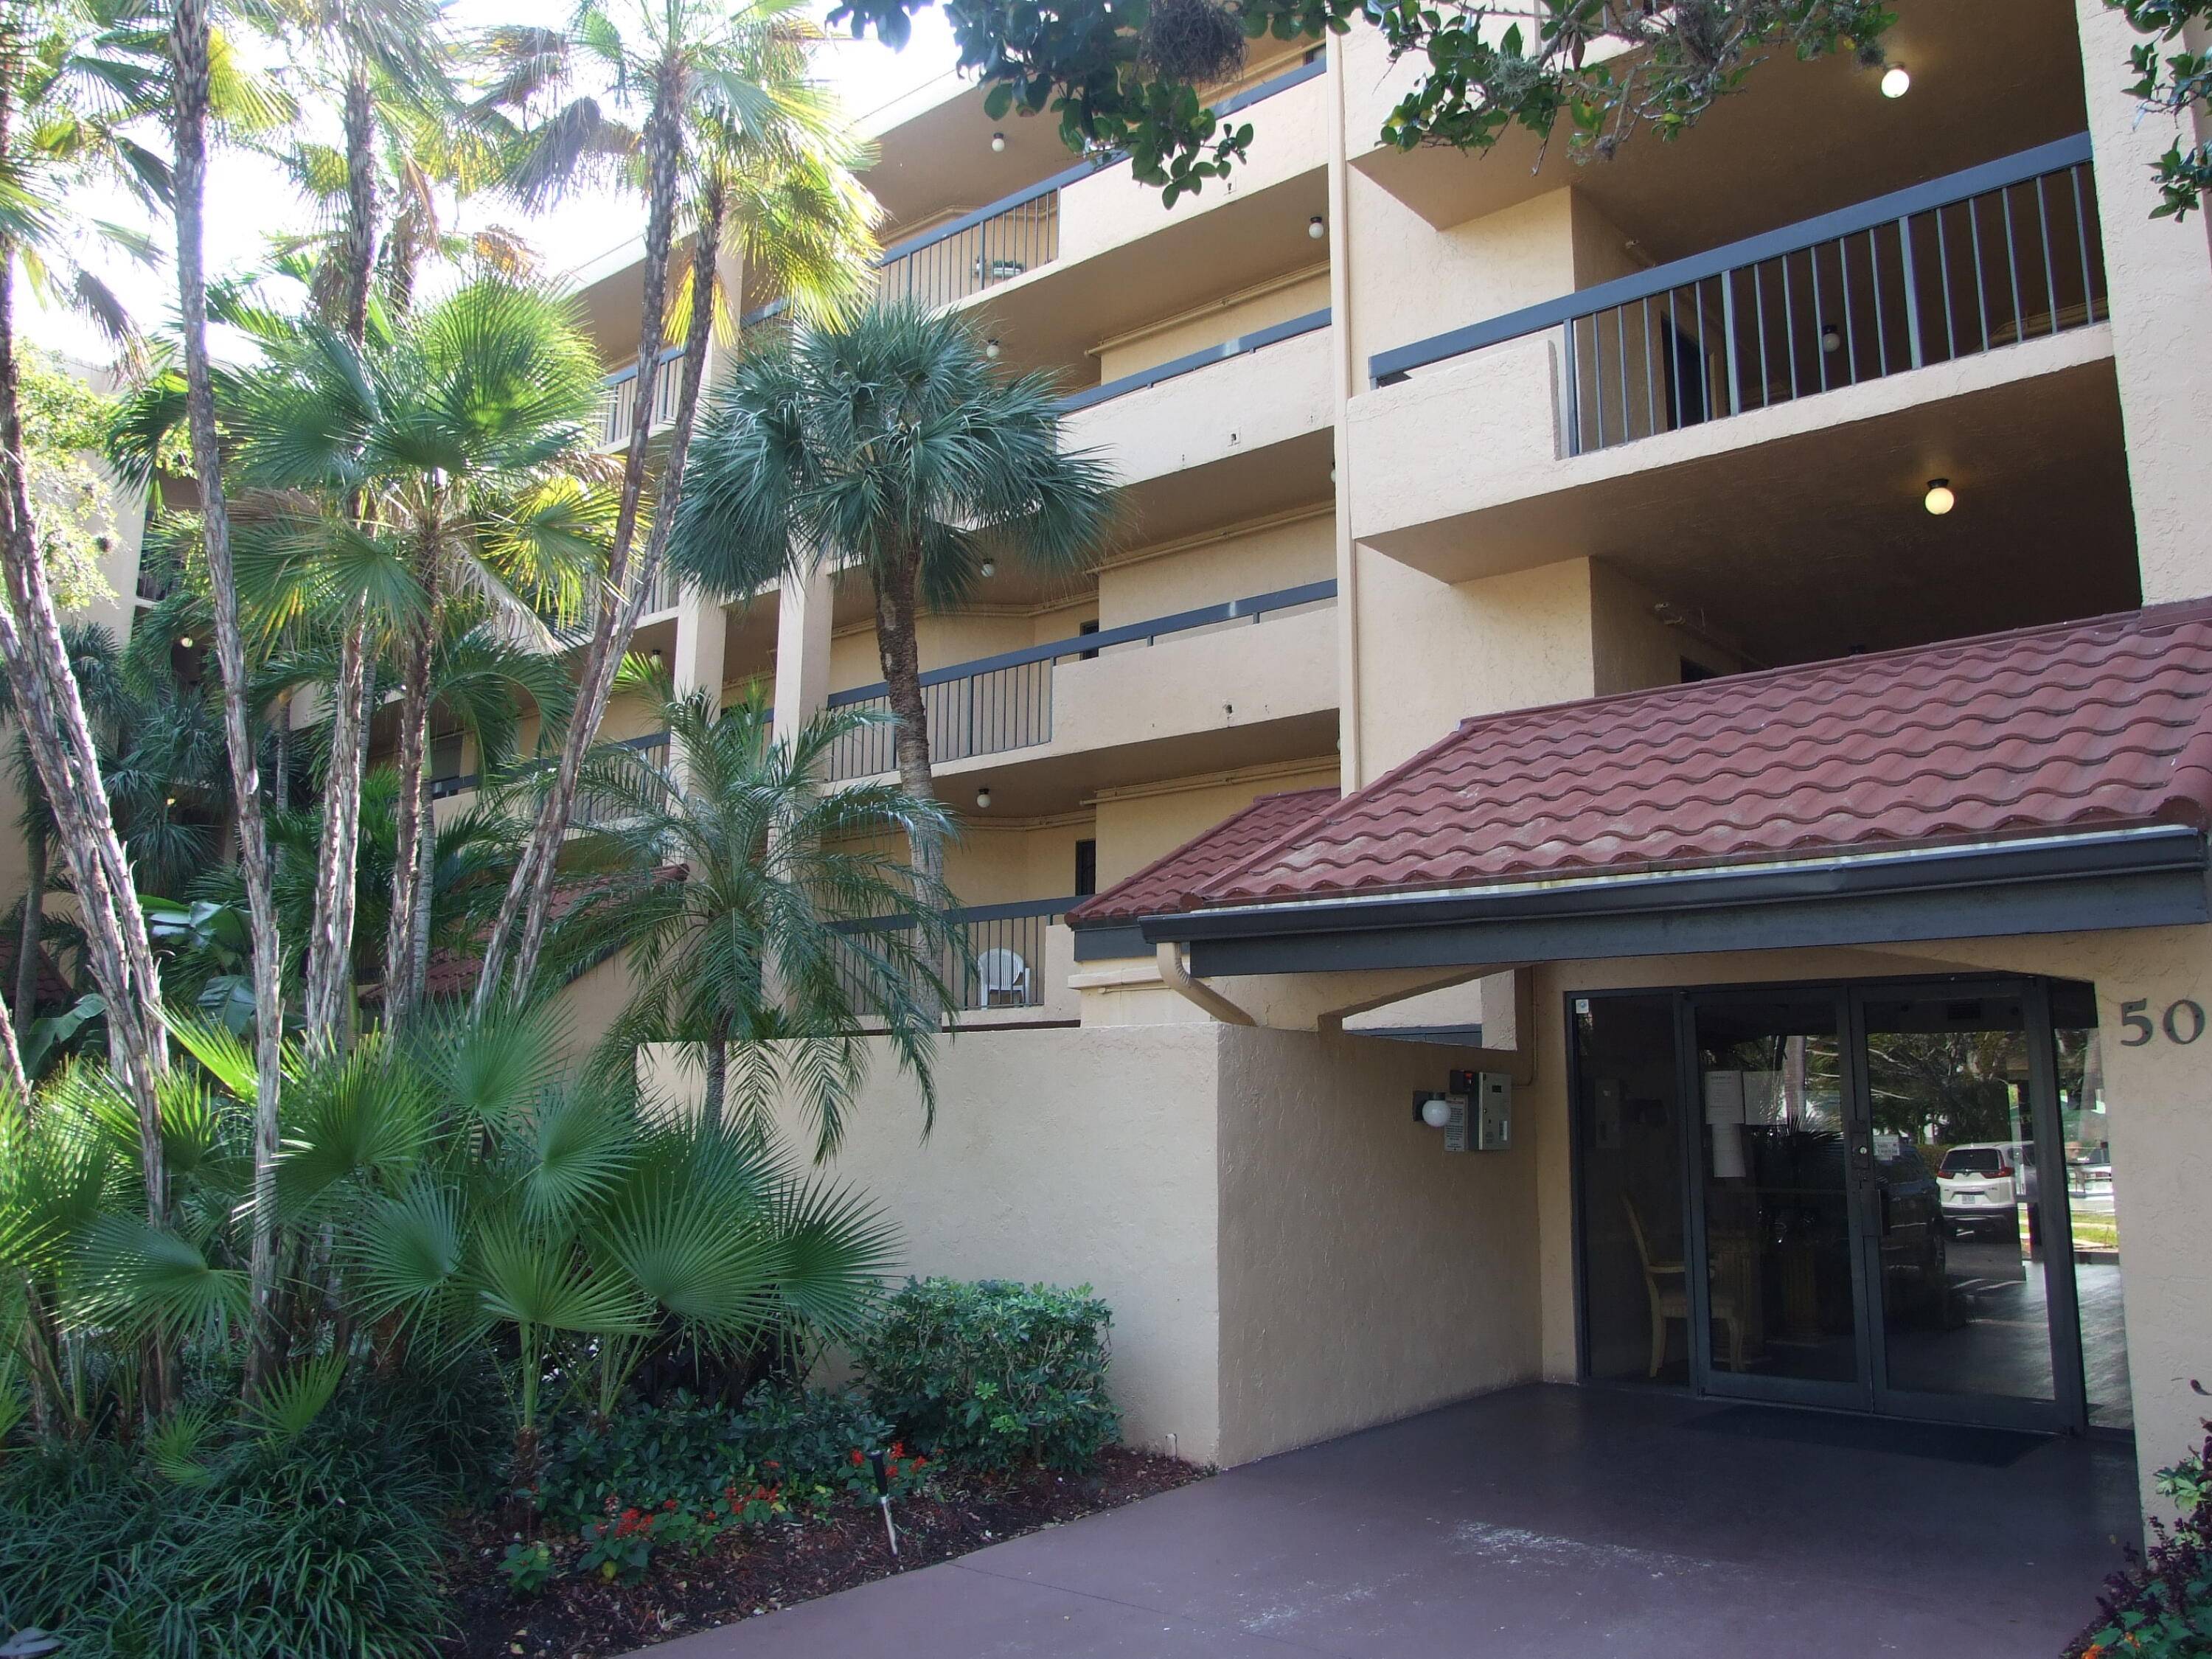 TENNIS HAVEN AND ONLY 1 MILE FROM THE ENTERTAINMENT DISTRICT OF ATLANTIC AVE AND ONLY 2 MILES TO THE BEACH.